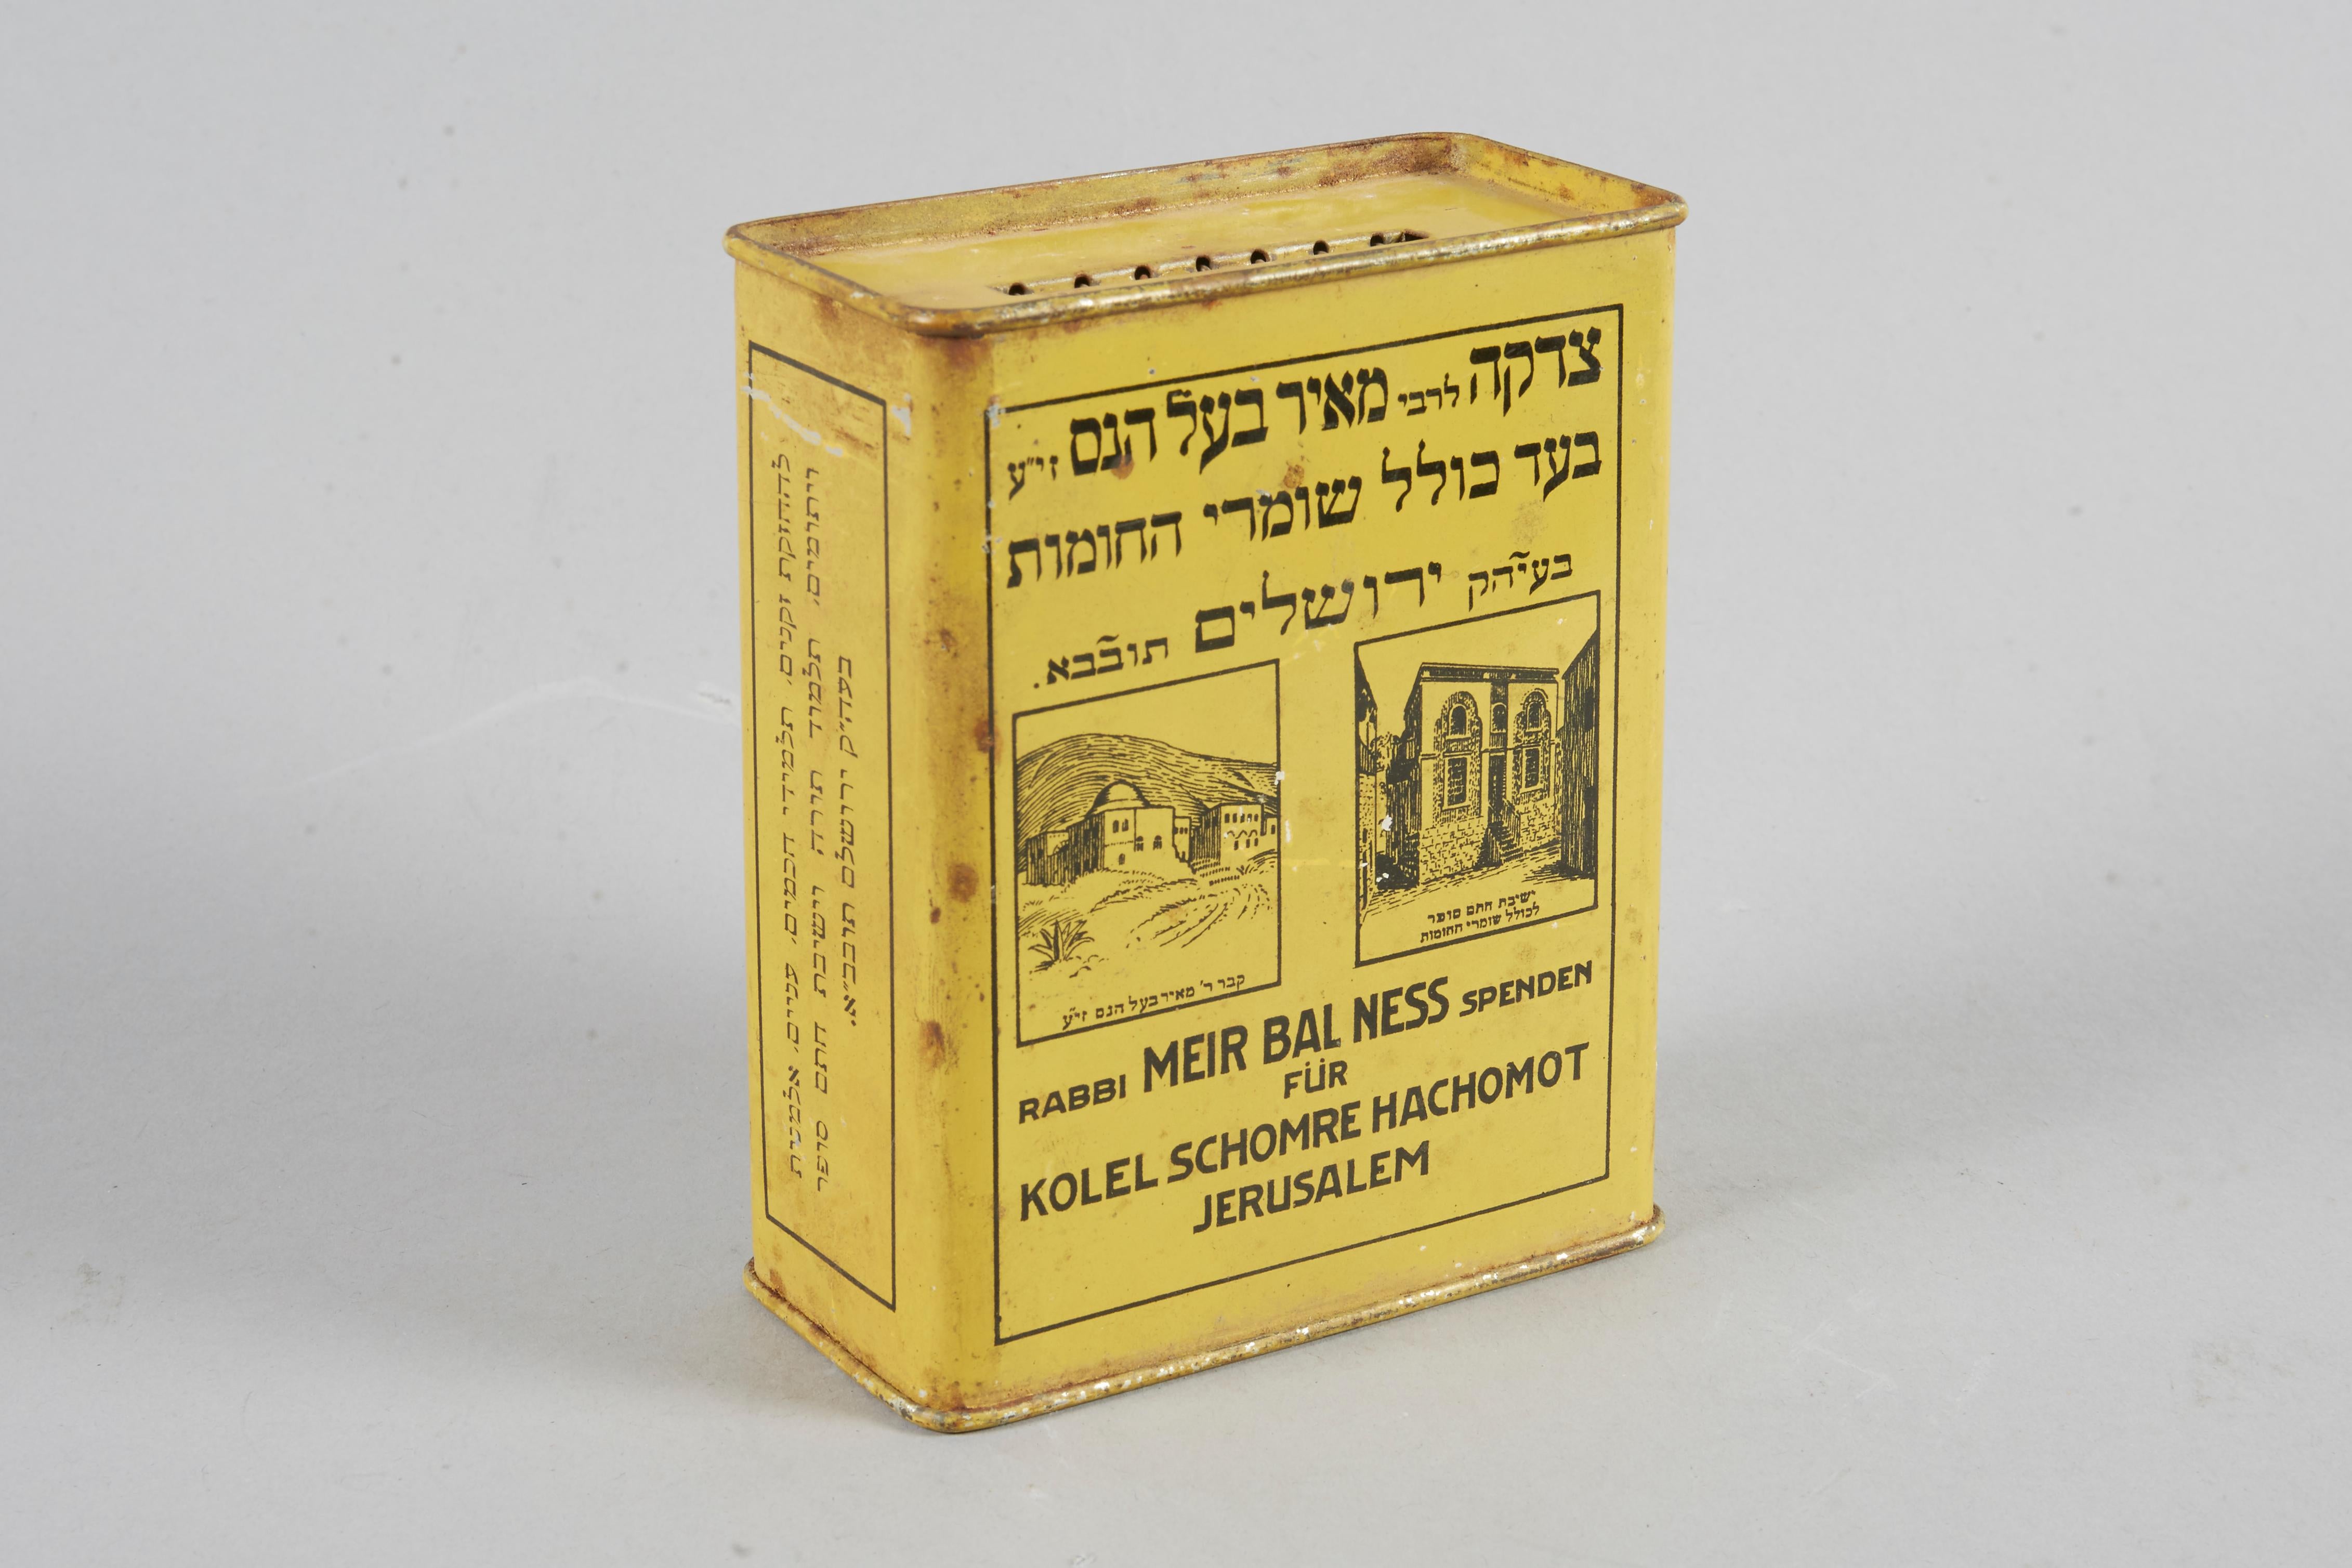 The front of the box is inscribed with Hebrew and German: 